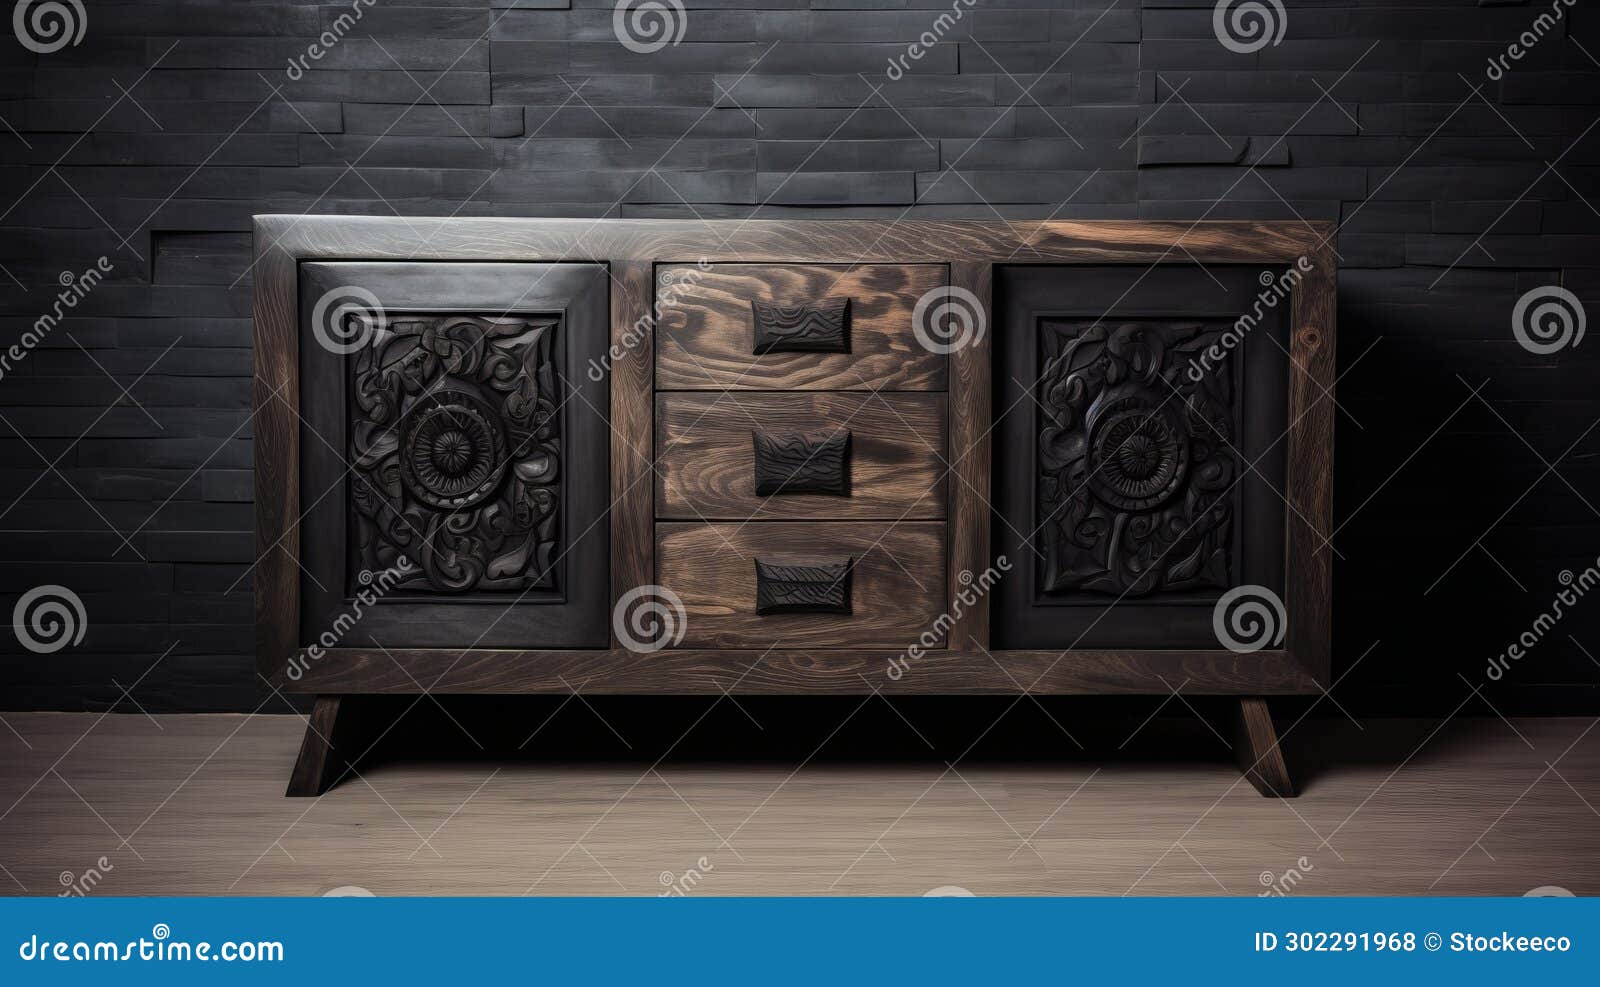 modern wood and iron dresser with detailed engravings and chinese iconography